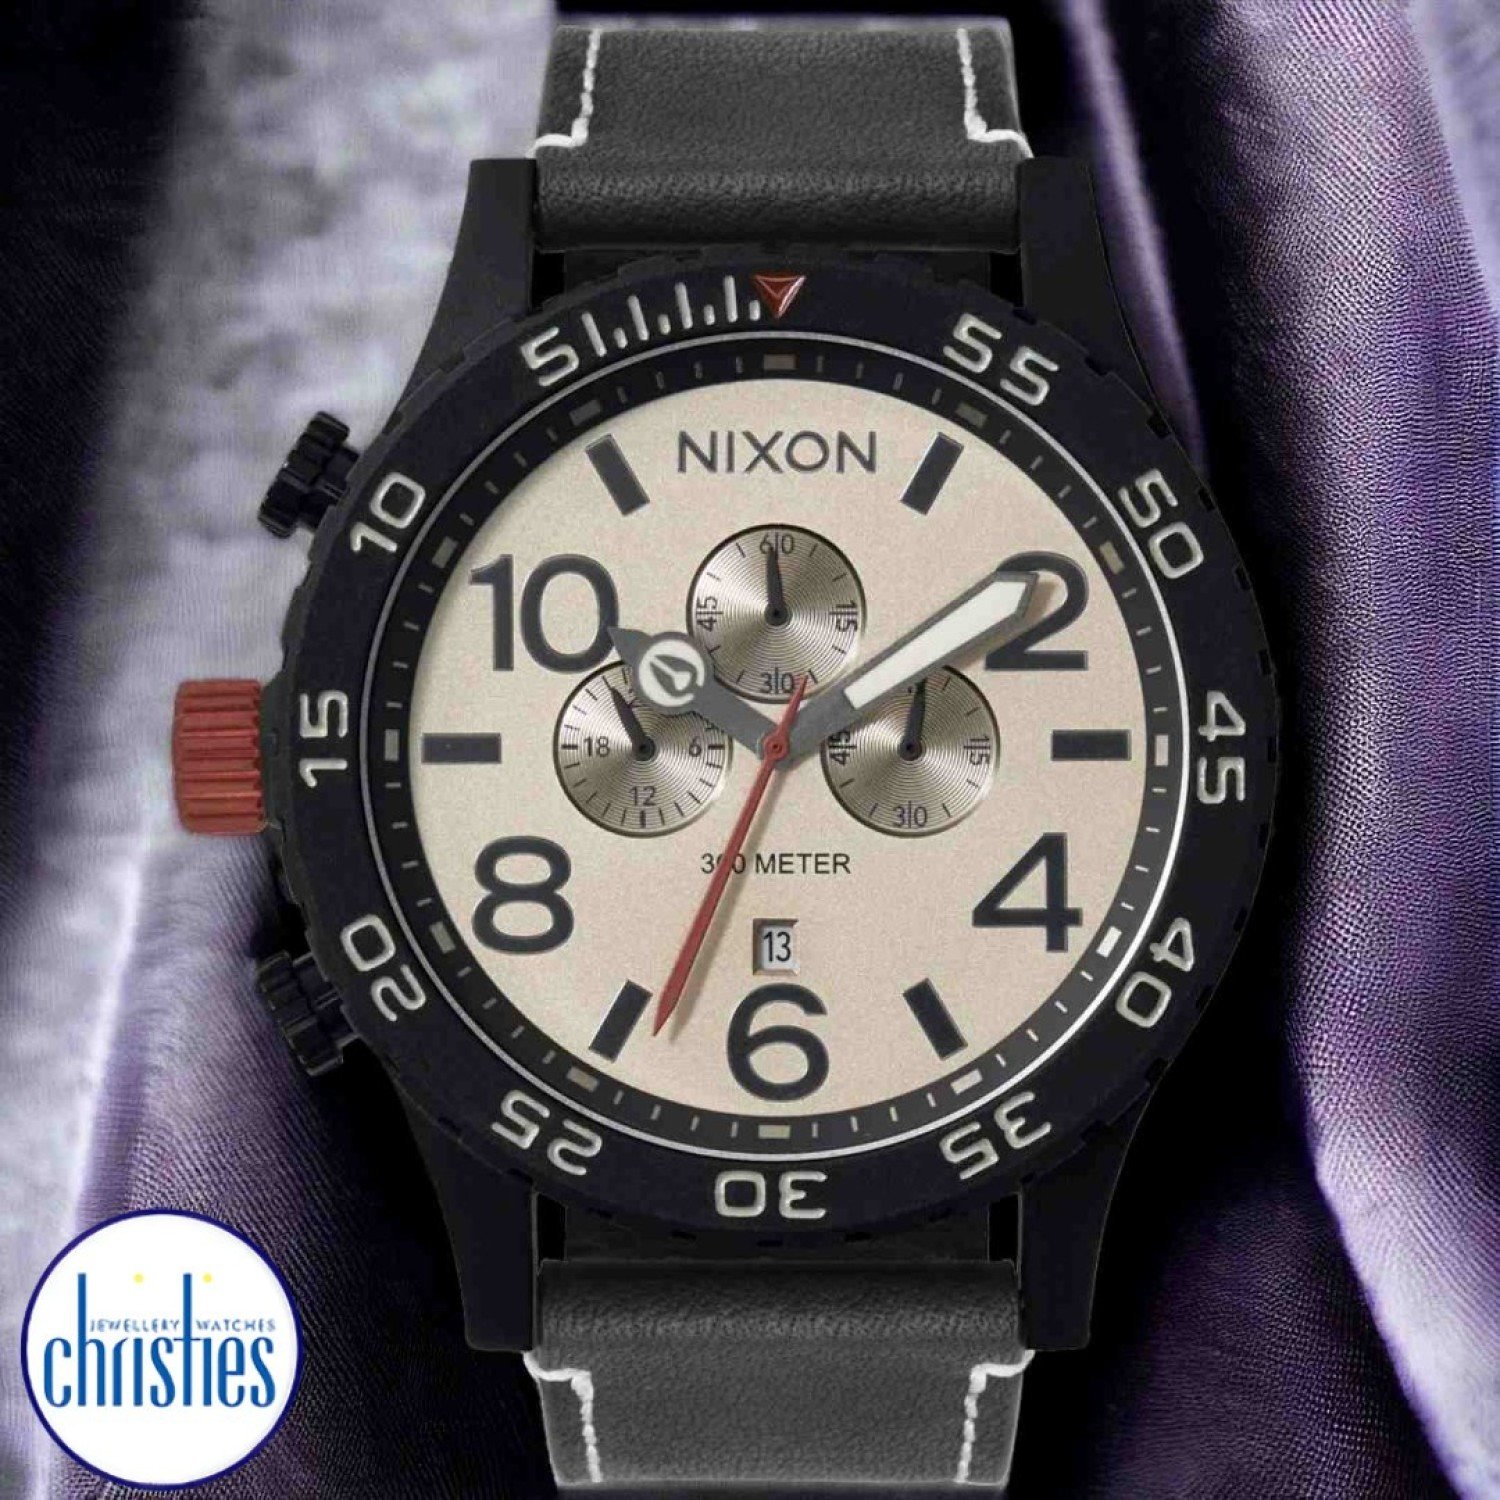 NIXON 51-30 Chrono Leather Watch A1392-5238-00 A13925238 NIXON Watches Auckland |Nixon watches are often chosen as gifts due to their stylish designs and functionality.